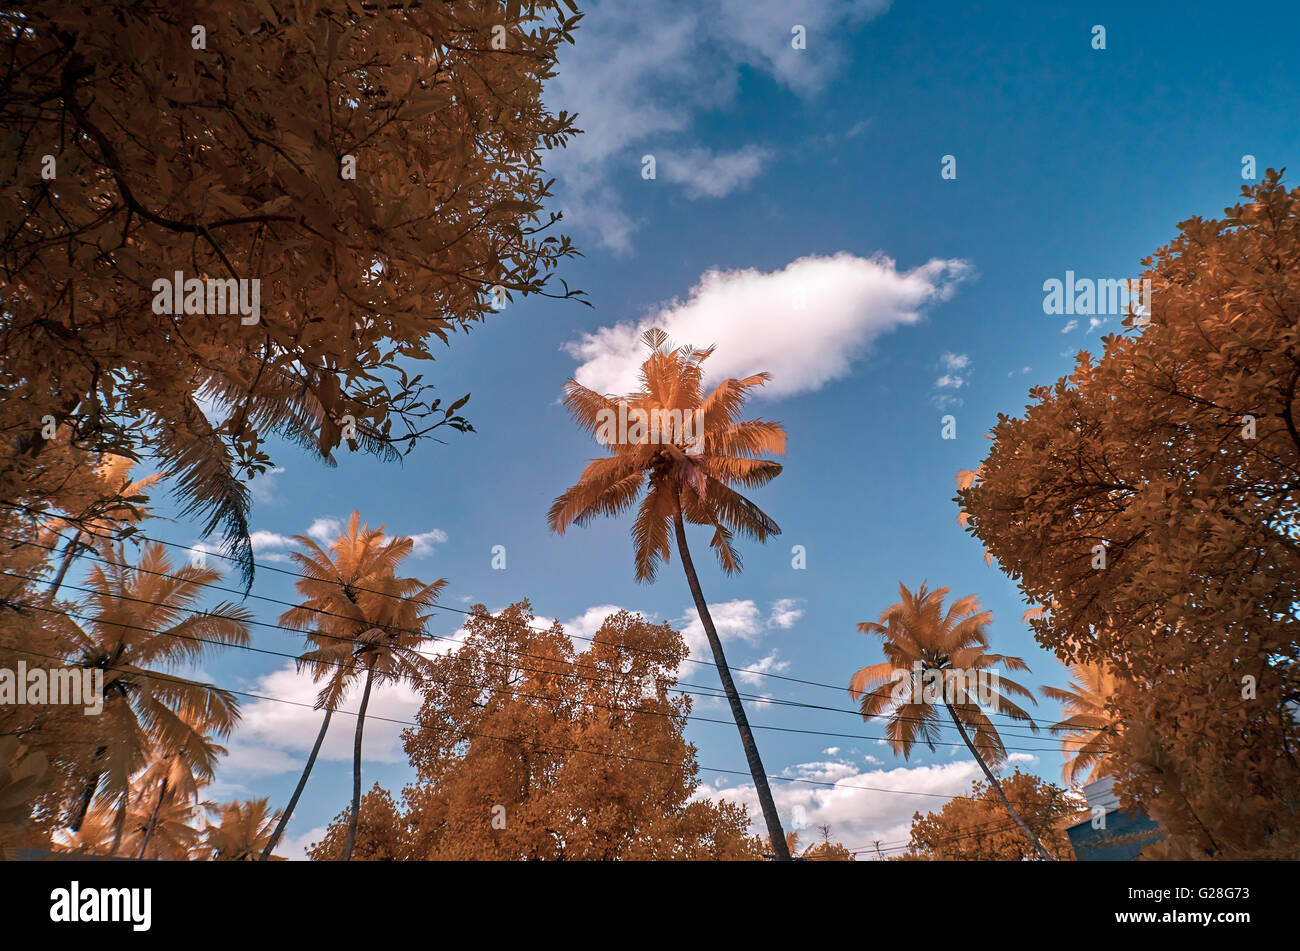 Infra red image of red foliage against a blue sky with clouds Stock Photo